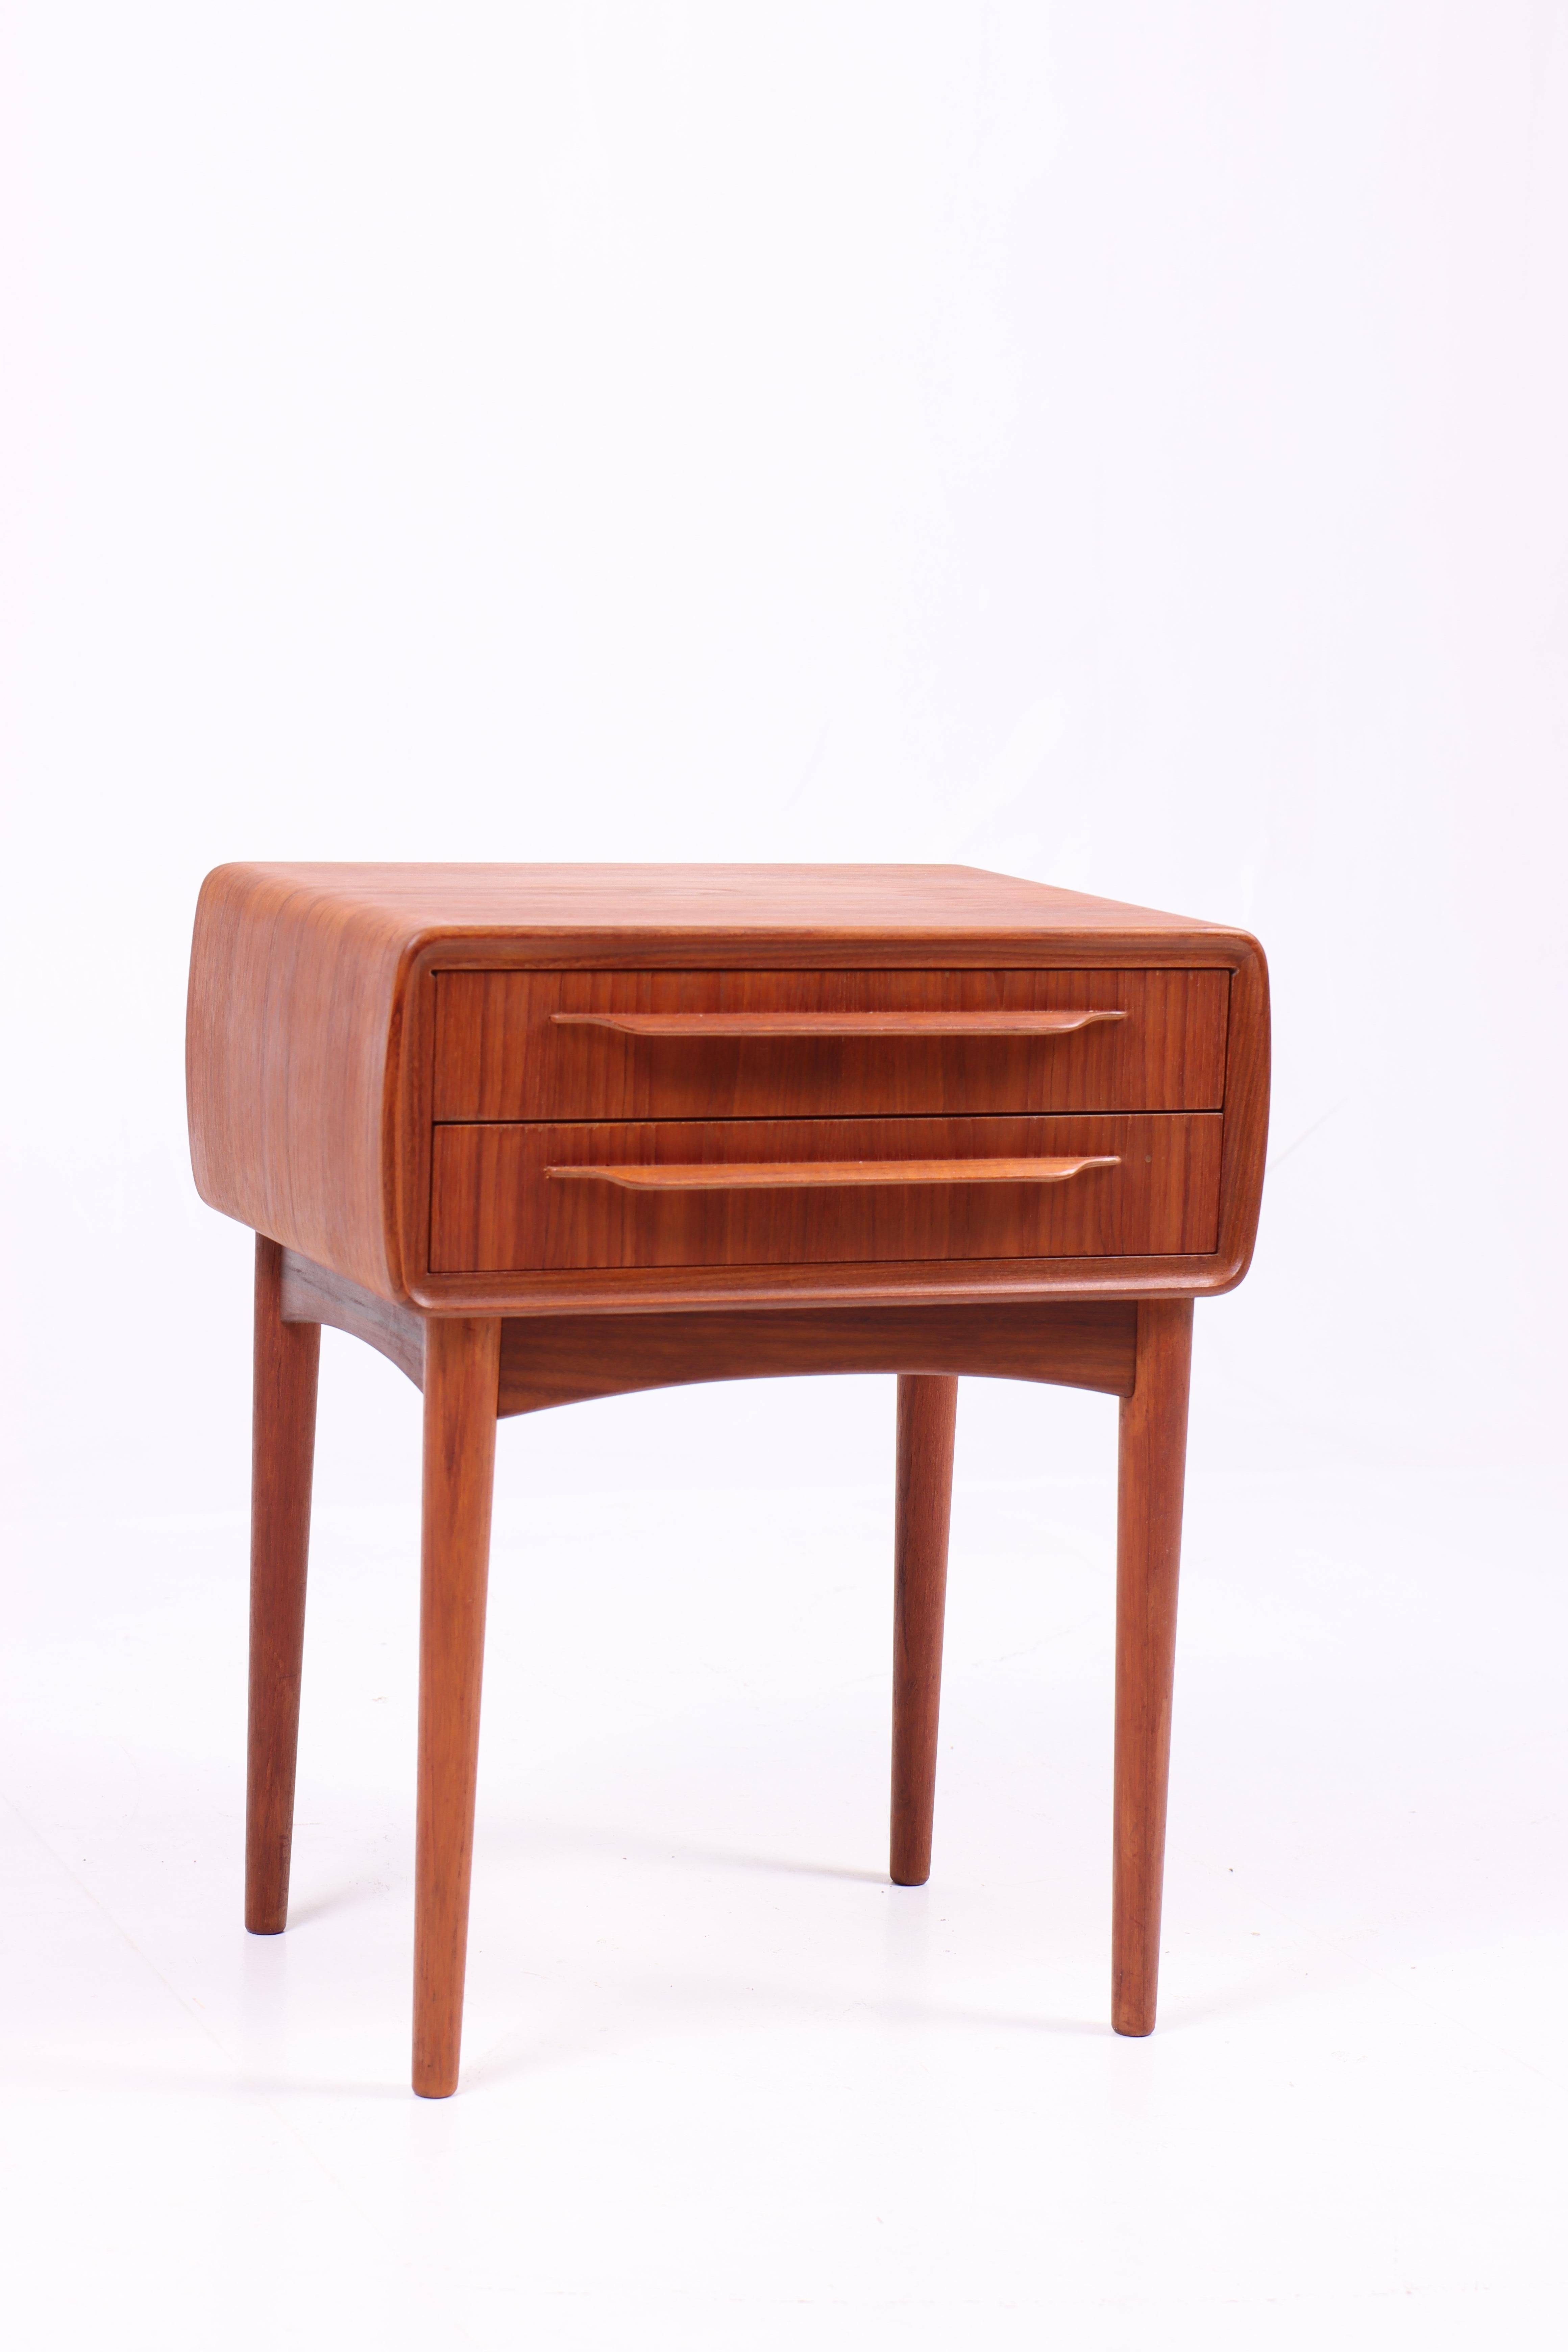 Midcentury nightstand in teak, designed by Maa. Johannes Andersen and made by CFC furniture, Denmark in the 1960s. Great original condition.